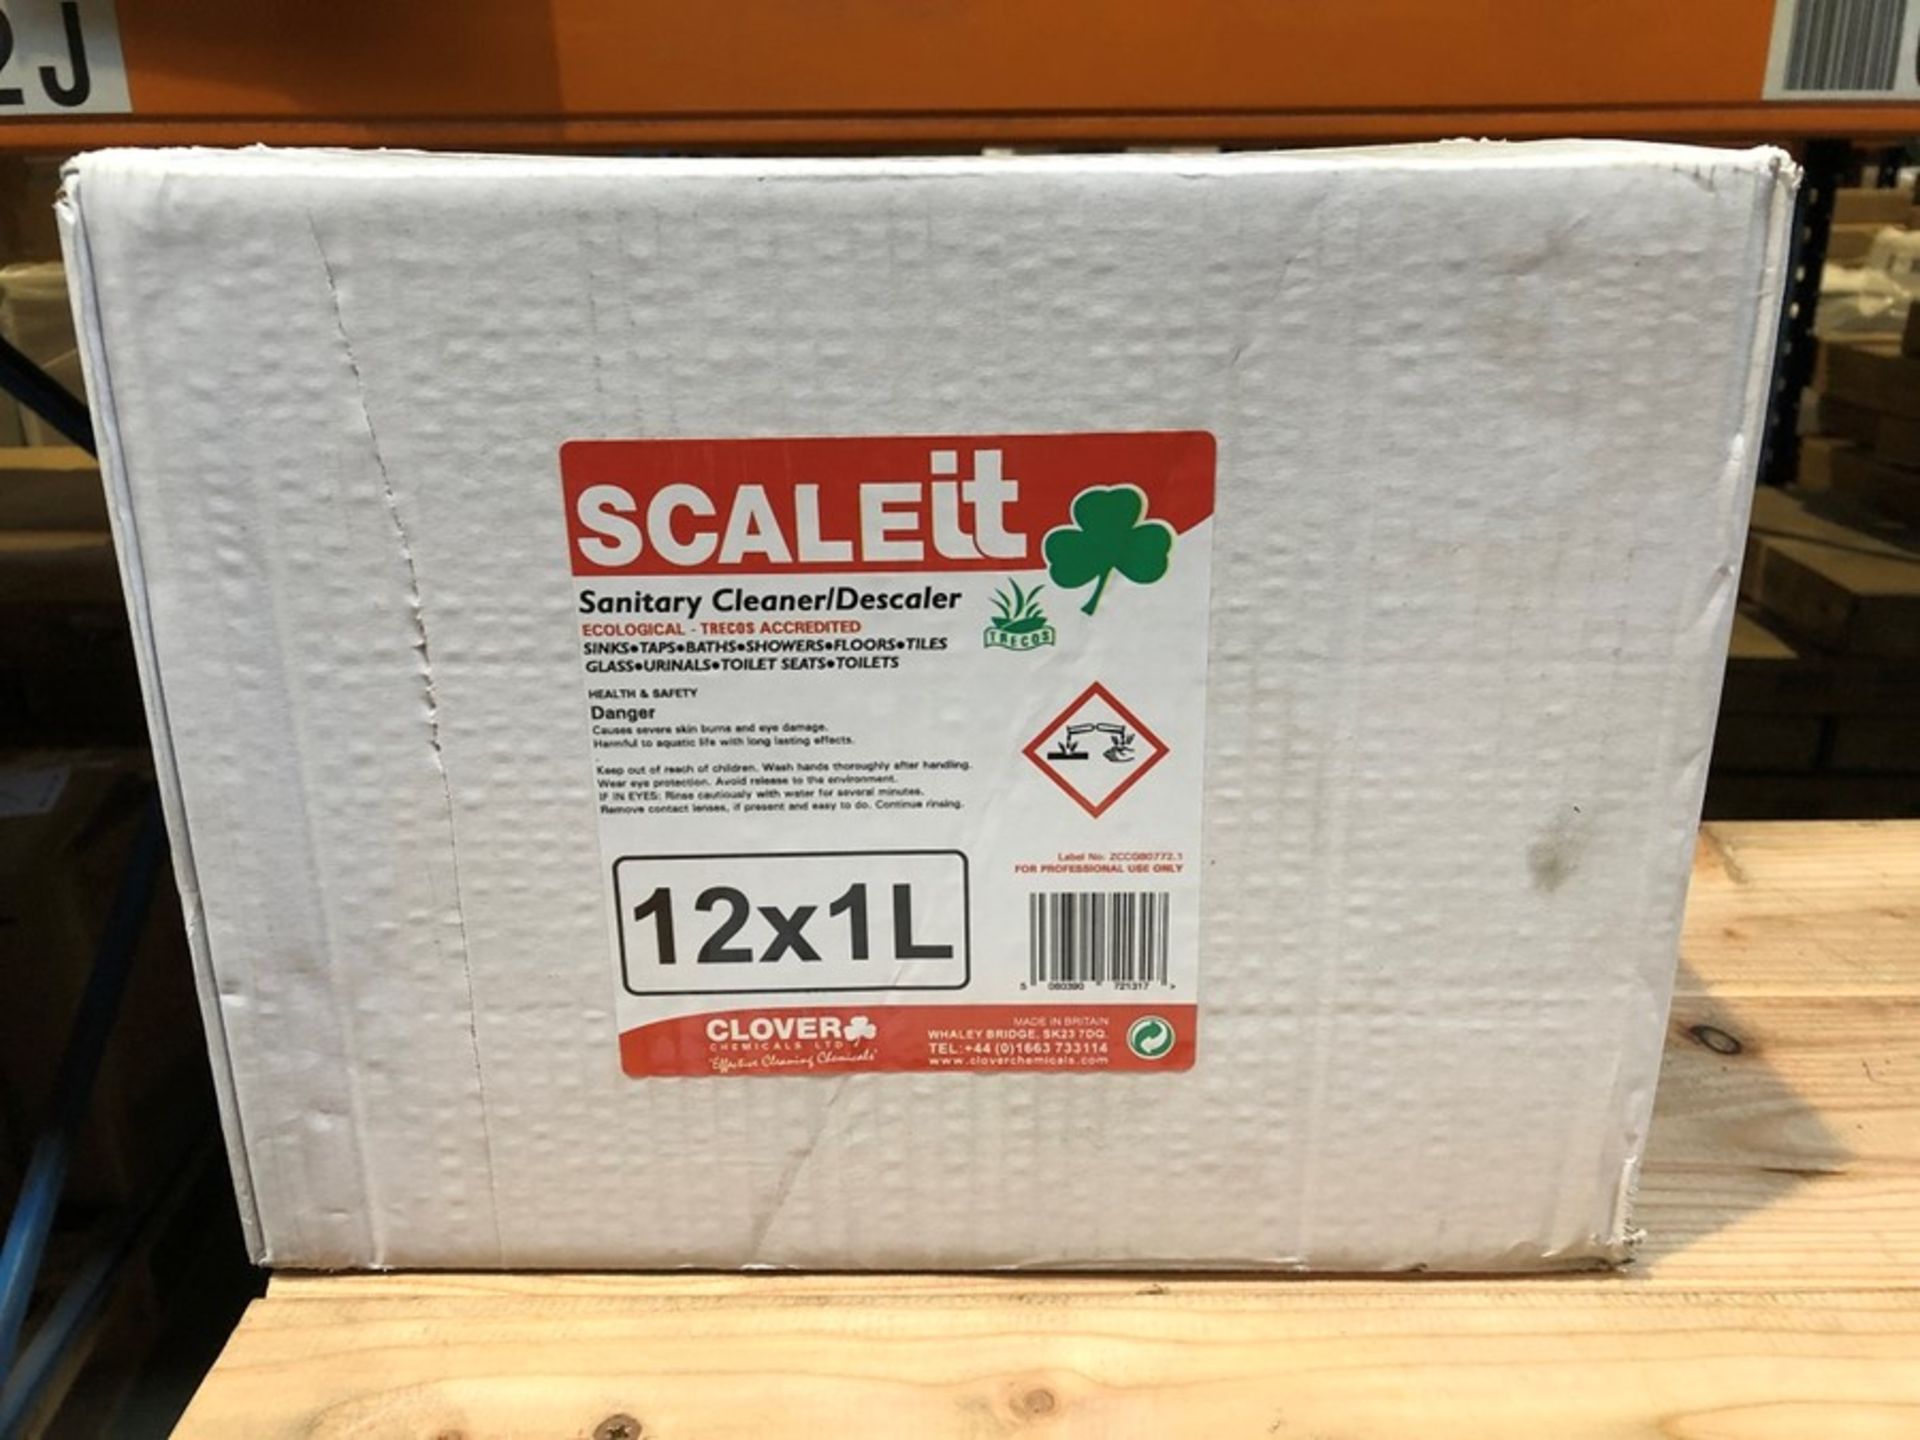 1 BOXED SET TO CONTAIN 12 BOTTLES OF SCALEIT SANITARY CLEANER/DESCALER - 12 X 1L (PUBLIC VIEWING